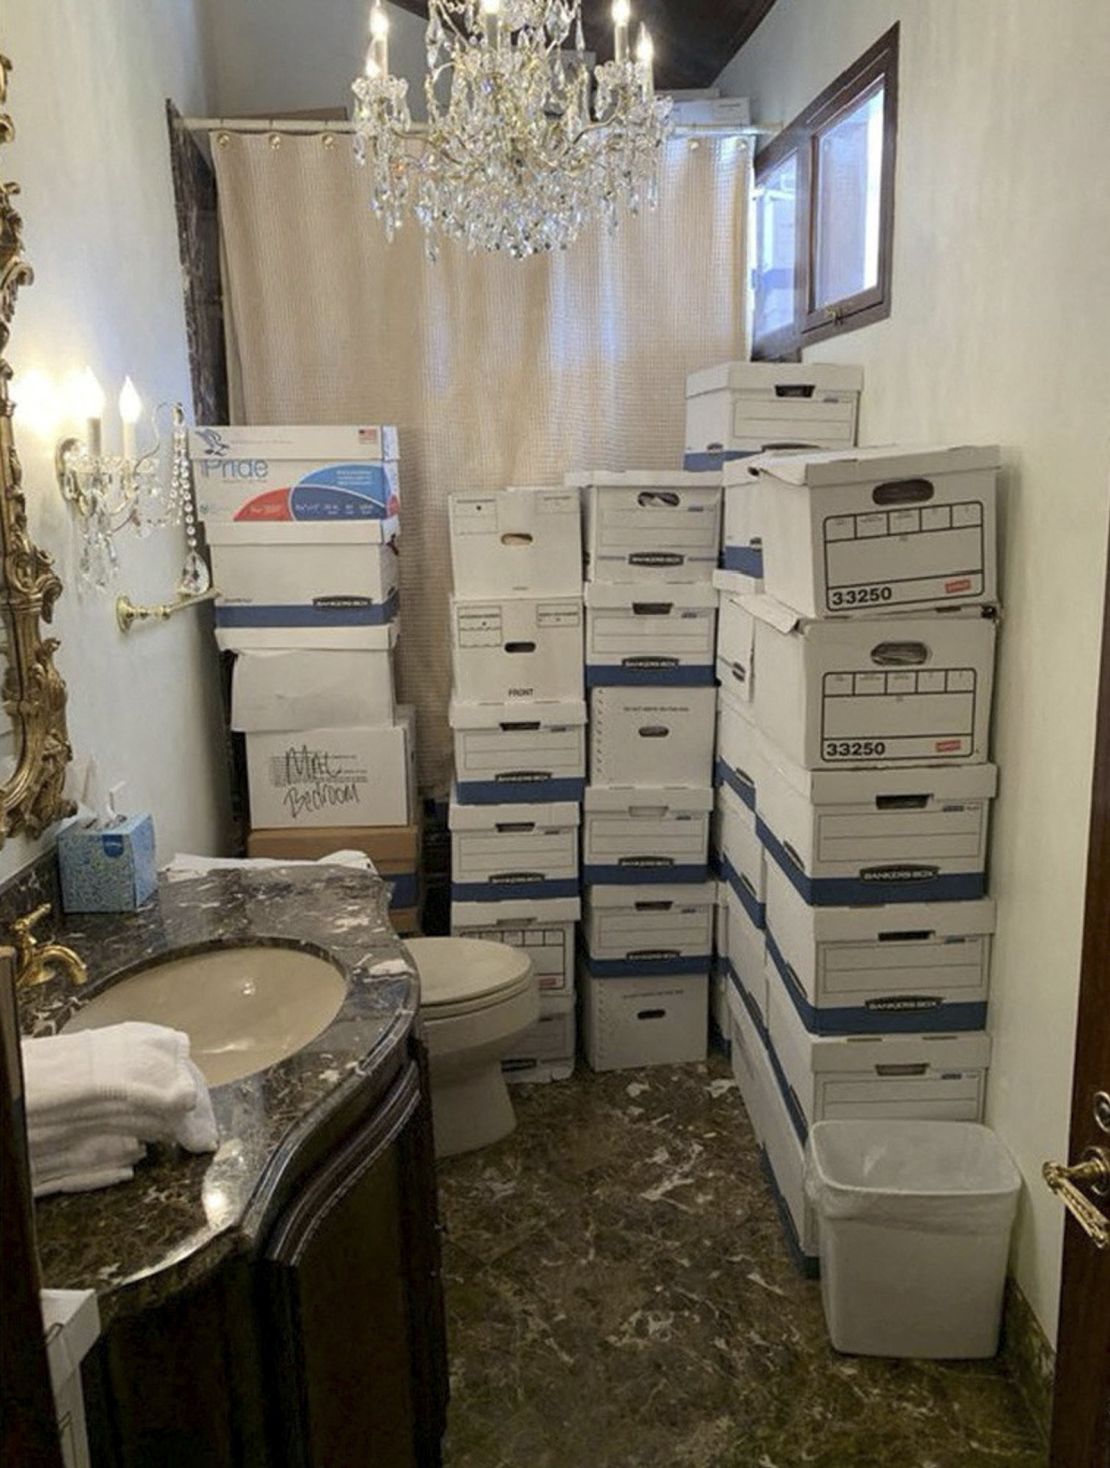 A photo released by the Department of Justice shows boxes of documents stored in a bathroom at Trump's Mar-a-Lago club in Florida in early 2021.